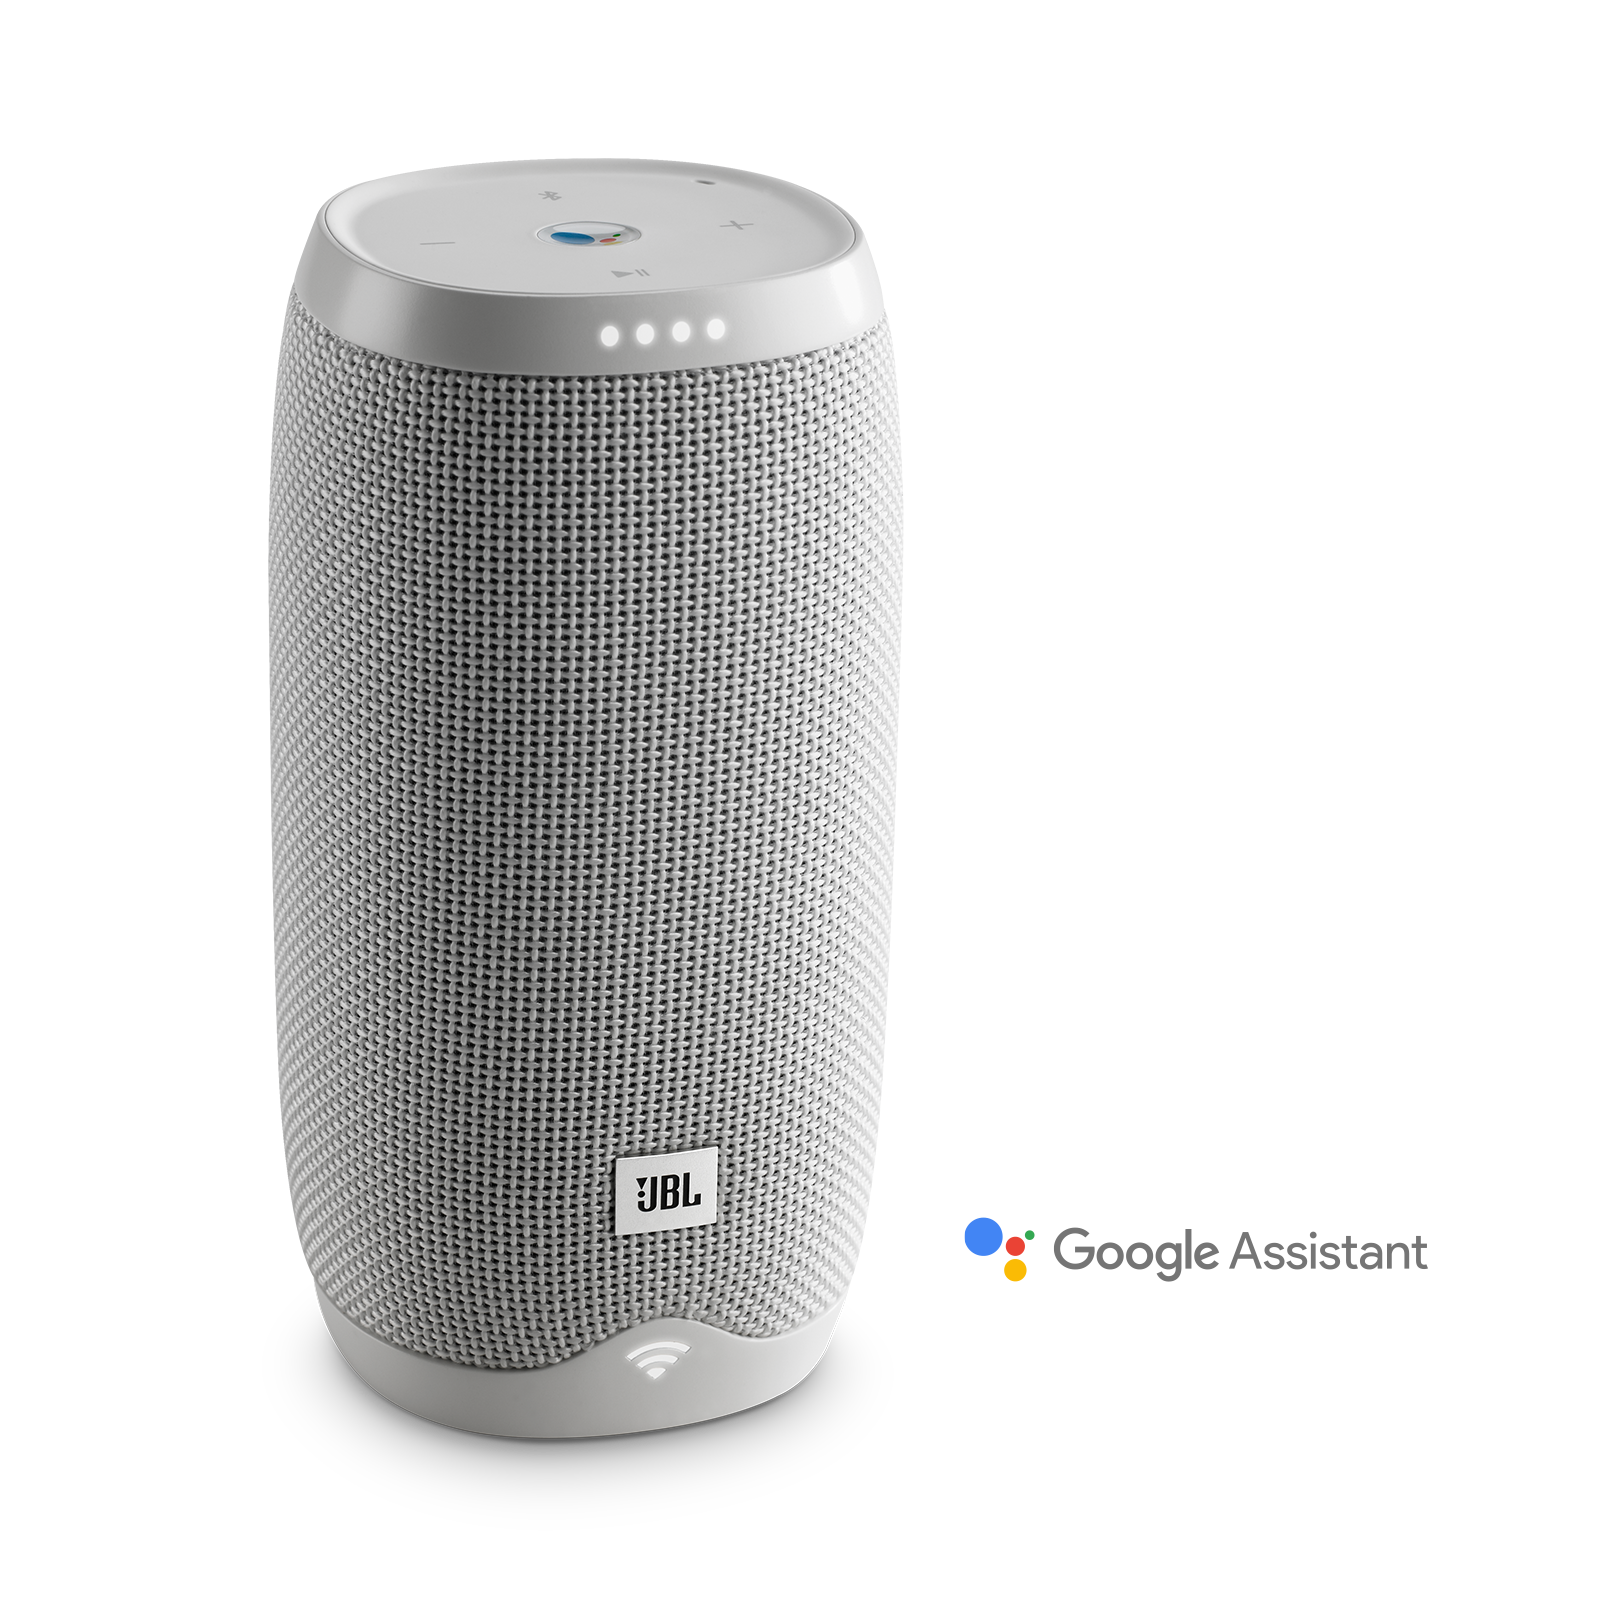 Link 10 | Voice-activated portable speaker